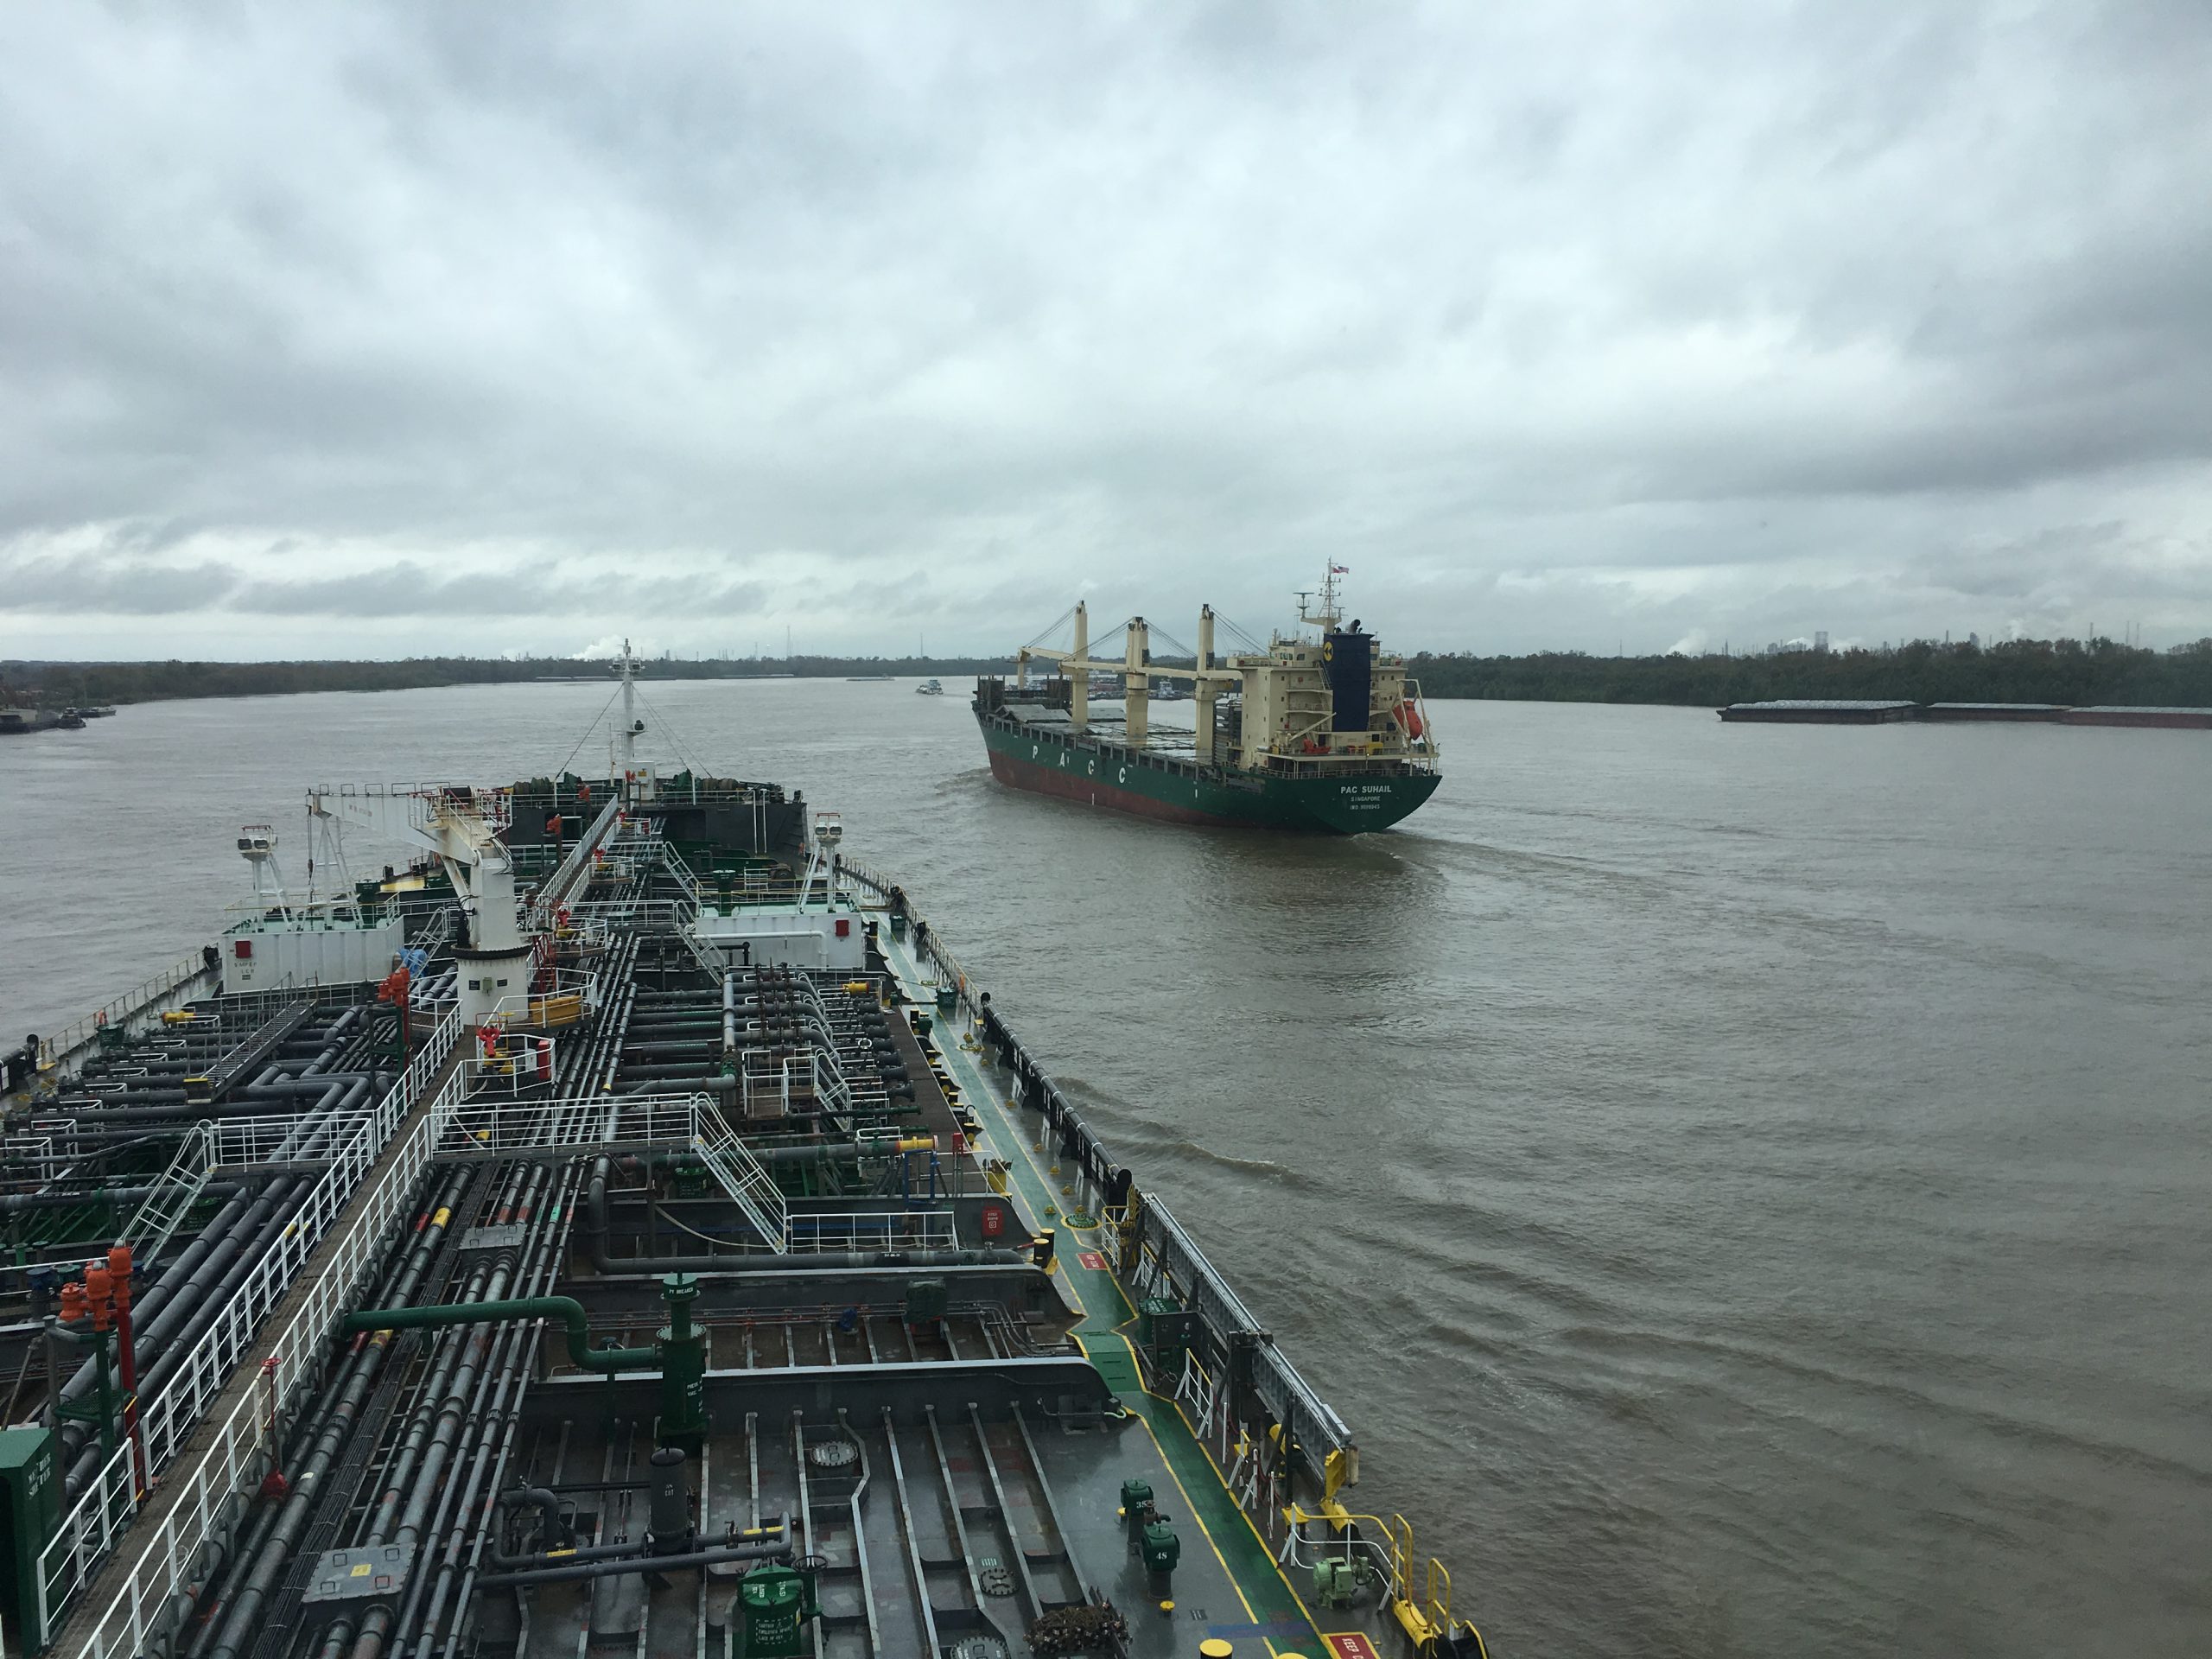 Ships passing on the lower Mississippi River.